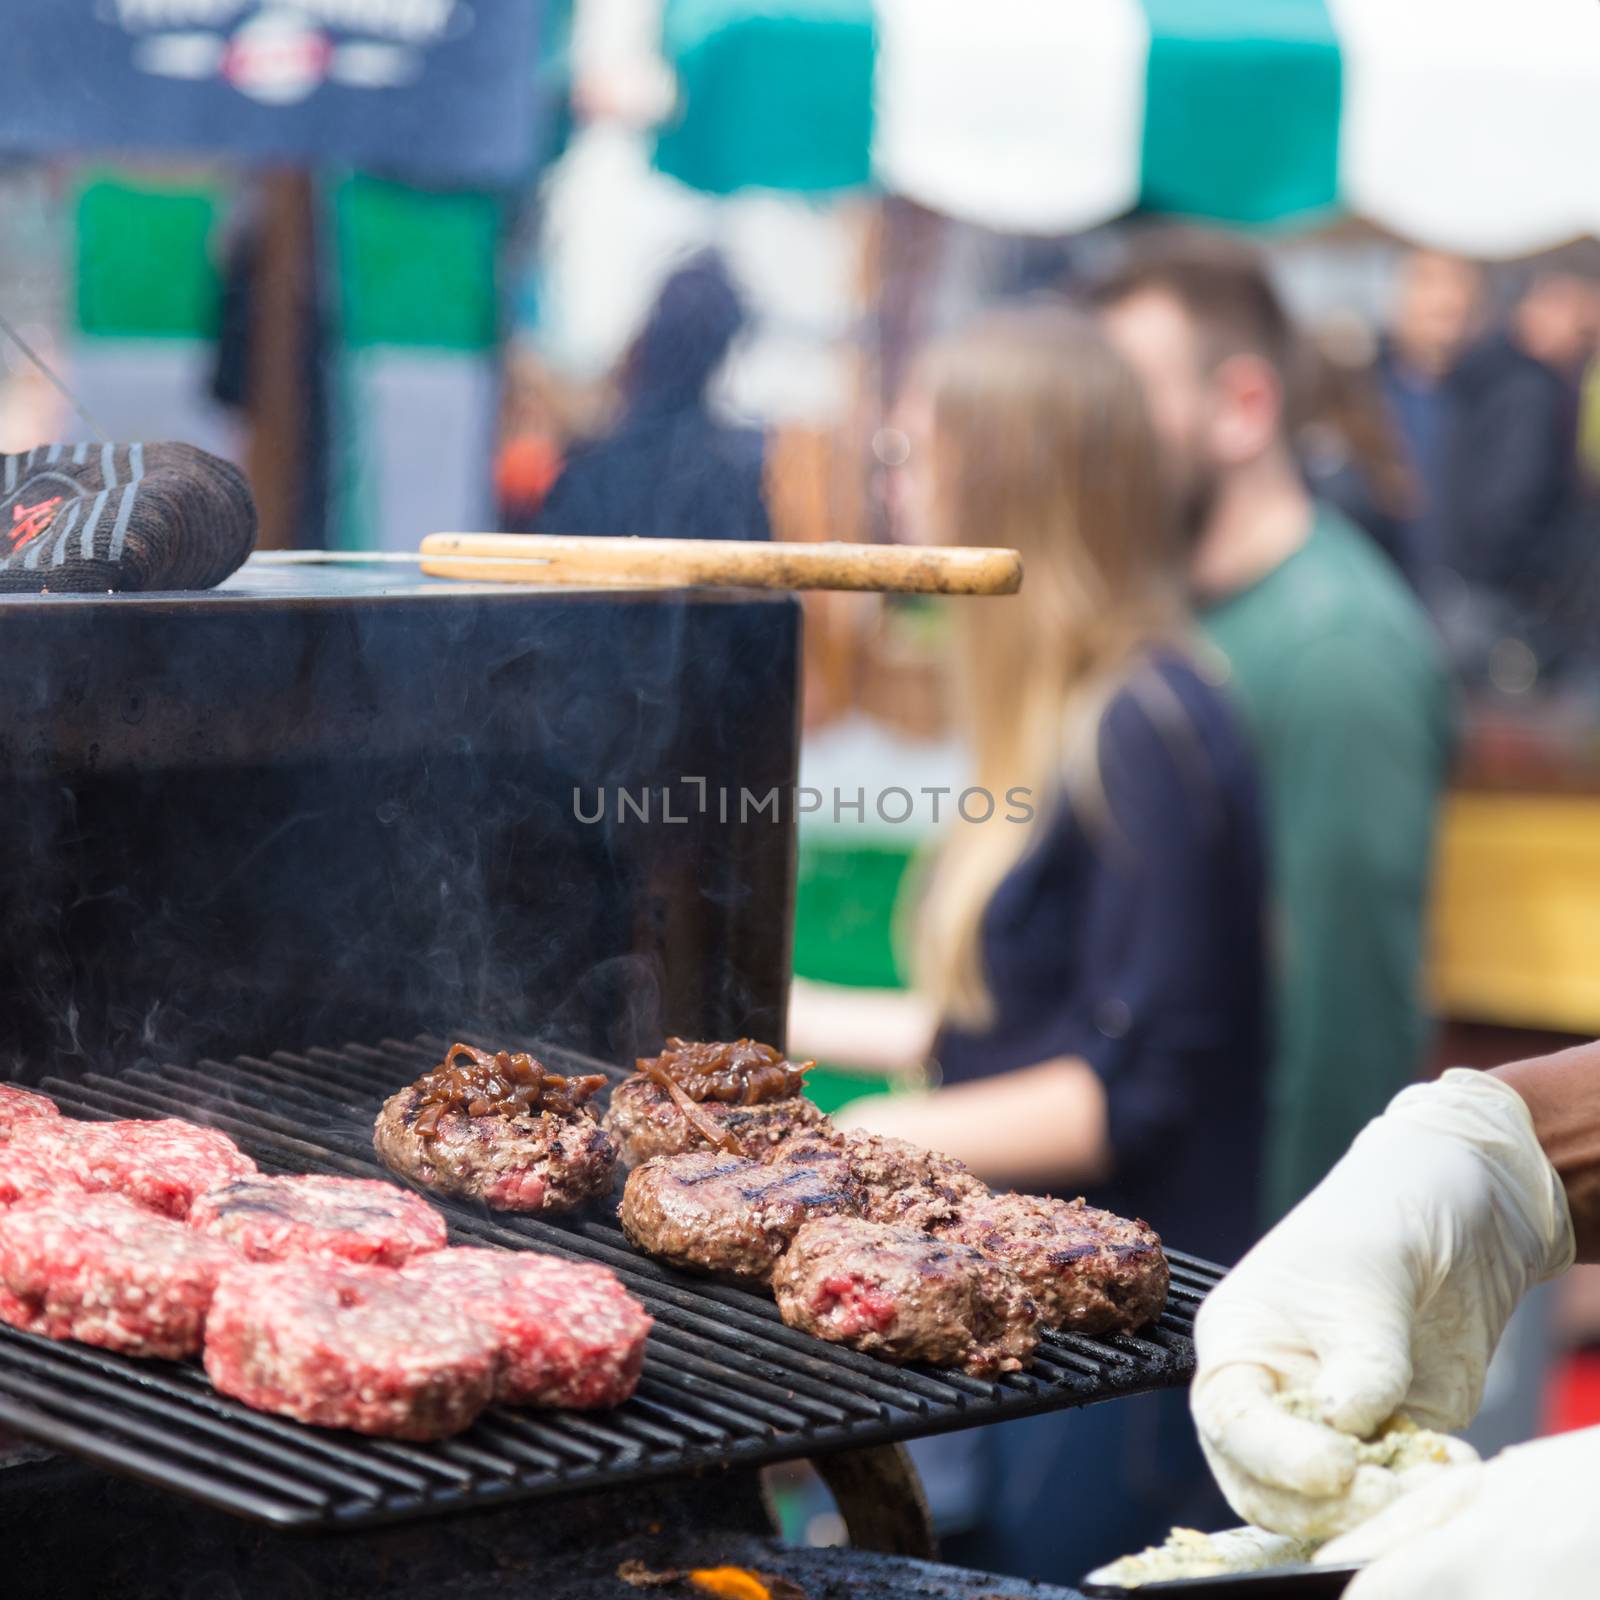 Chef making beef burgers outdoor on open kitchen international food festival event. Street food ready to serve on a food stall.